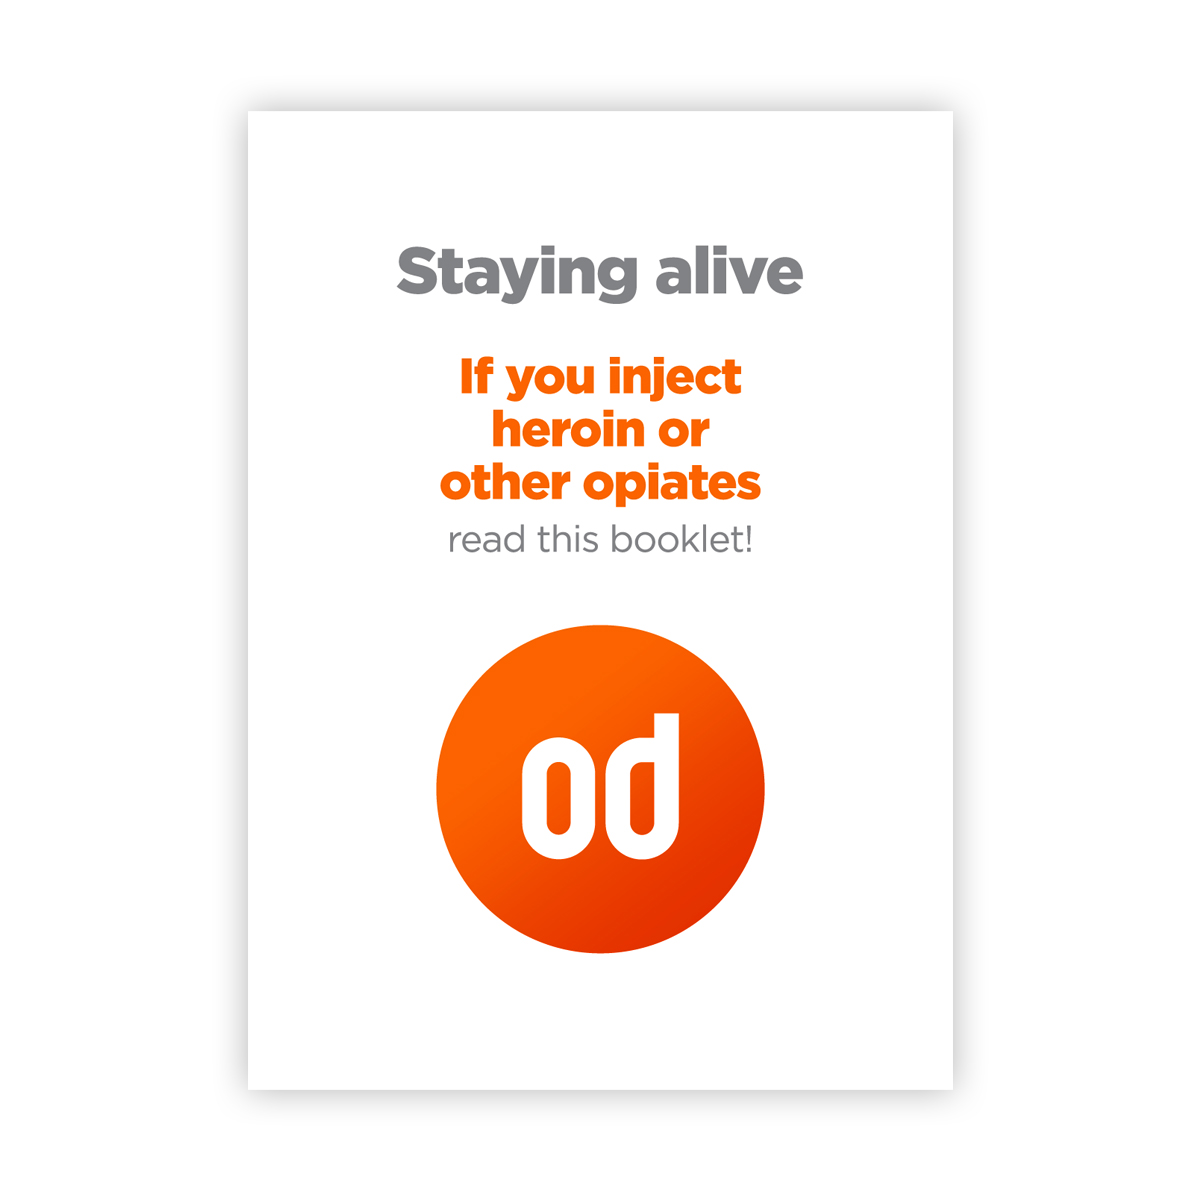 Staying alive (od booklet)